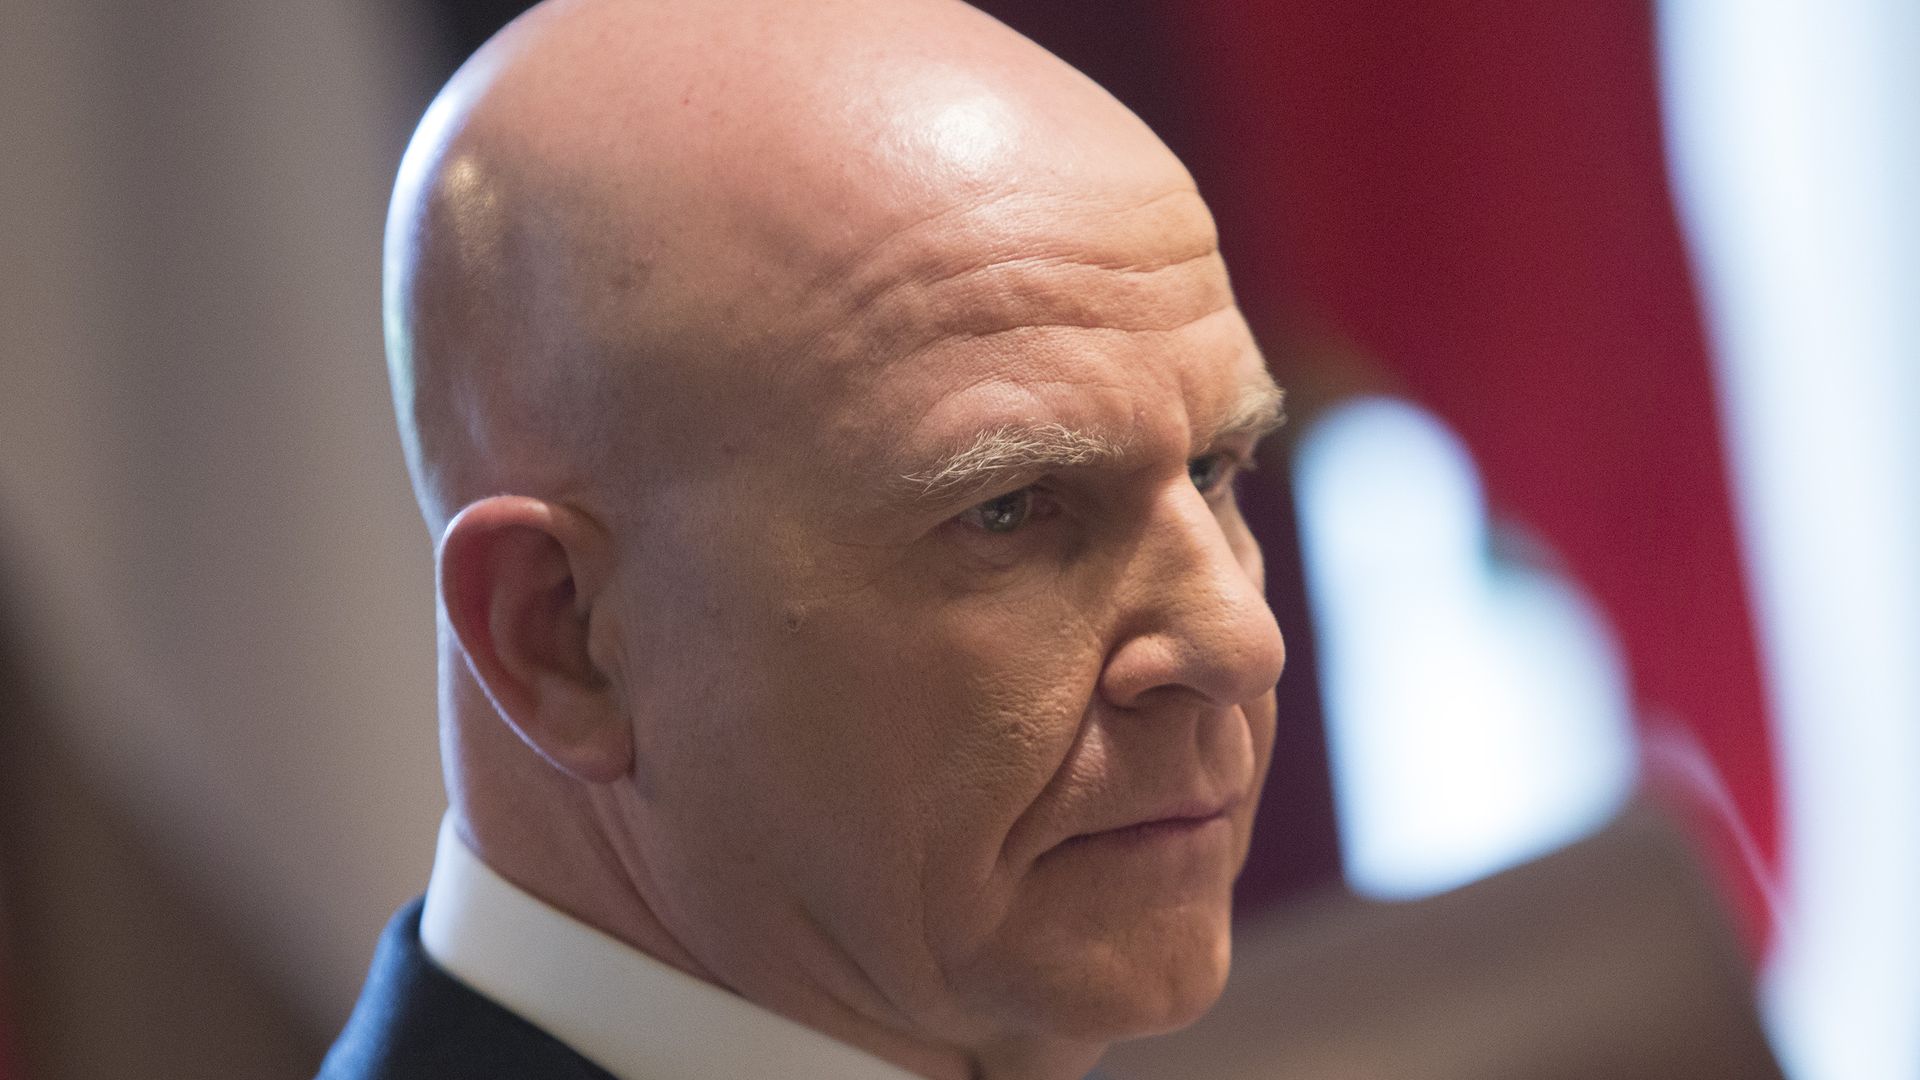 Former White House National Security Adviser H.R. McMaster at a meeting in 2018.